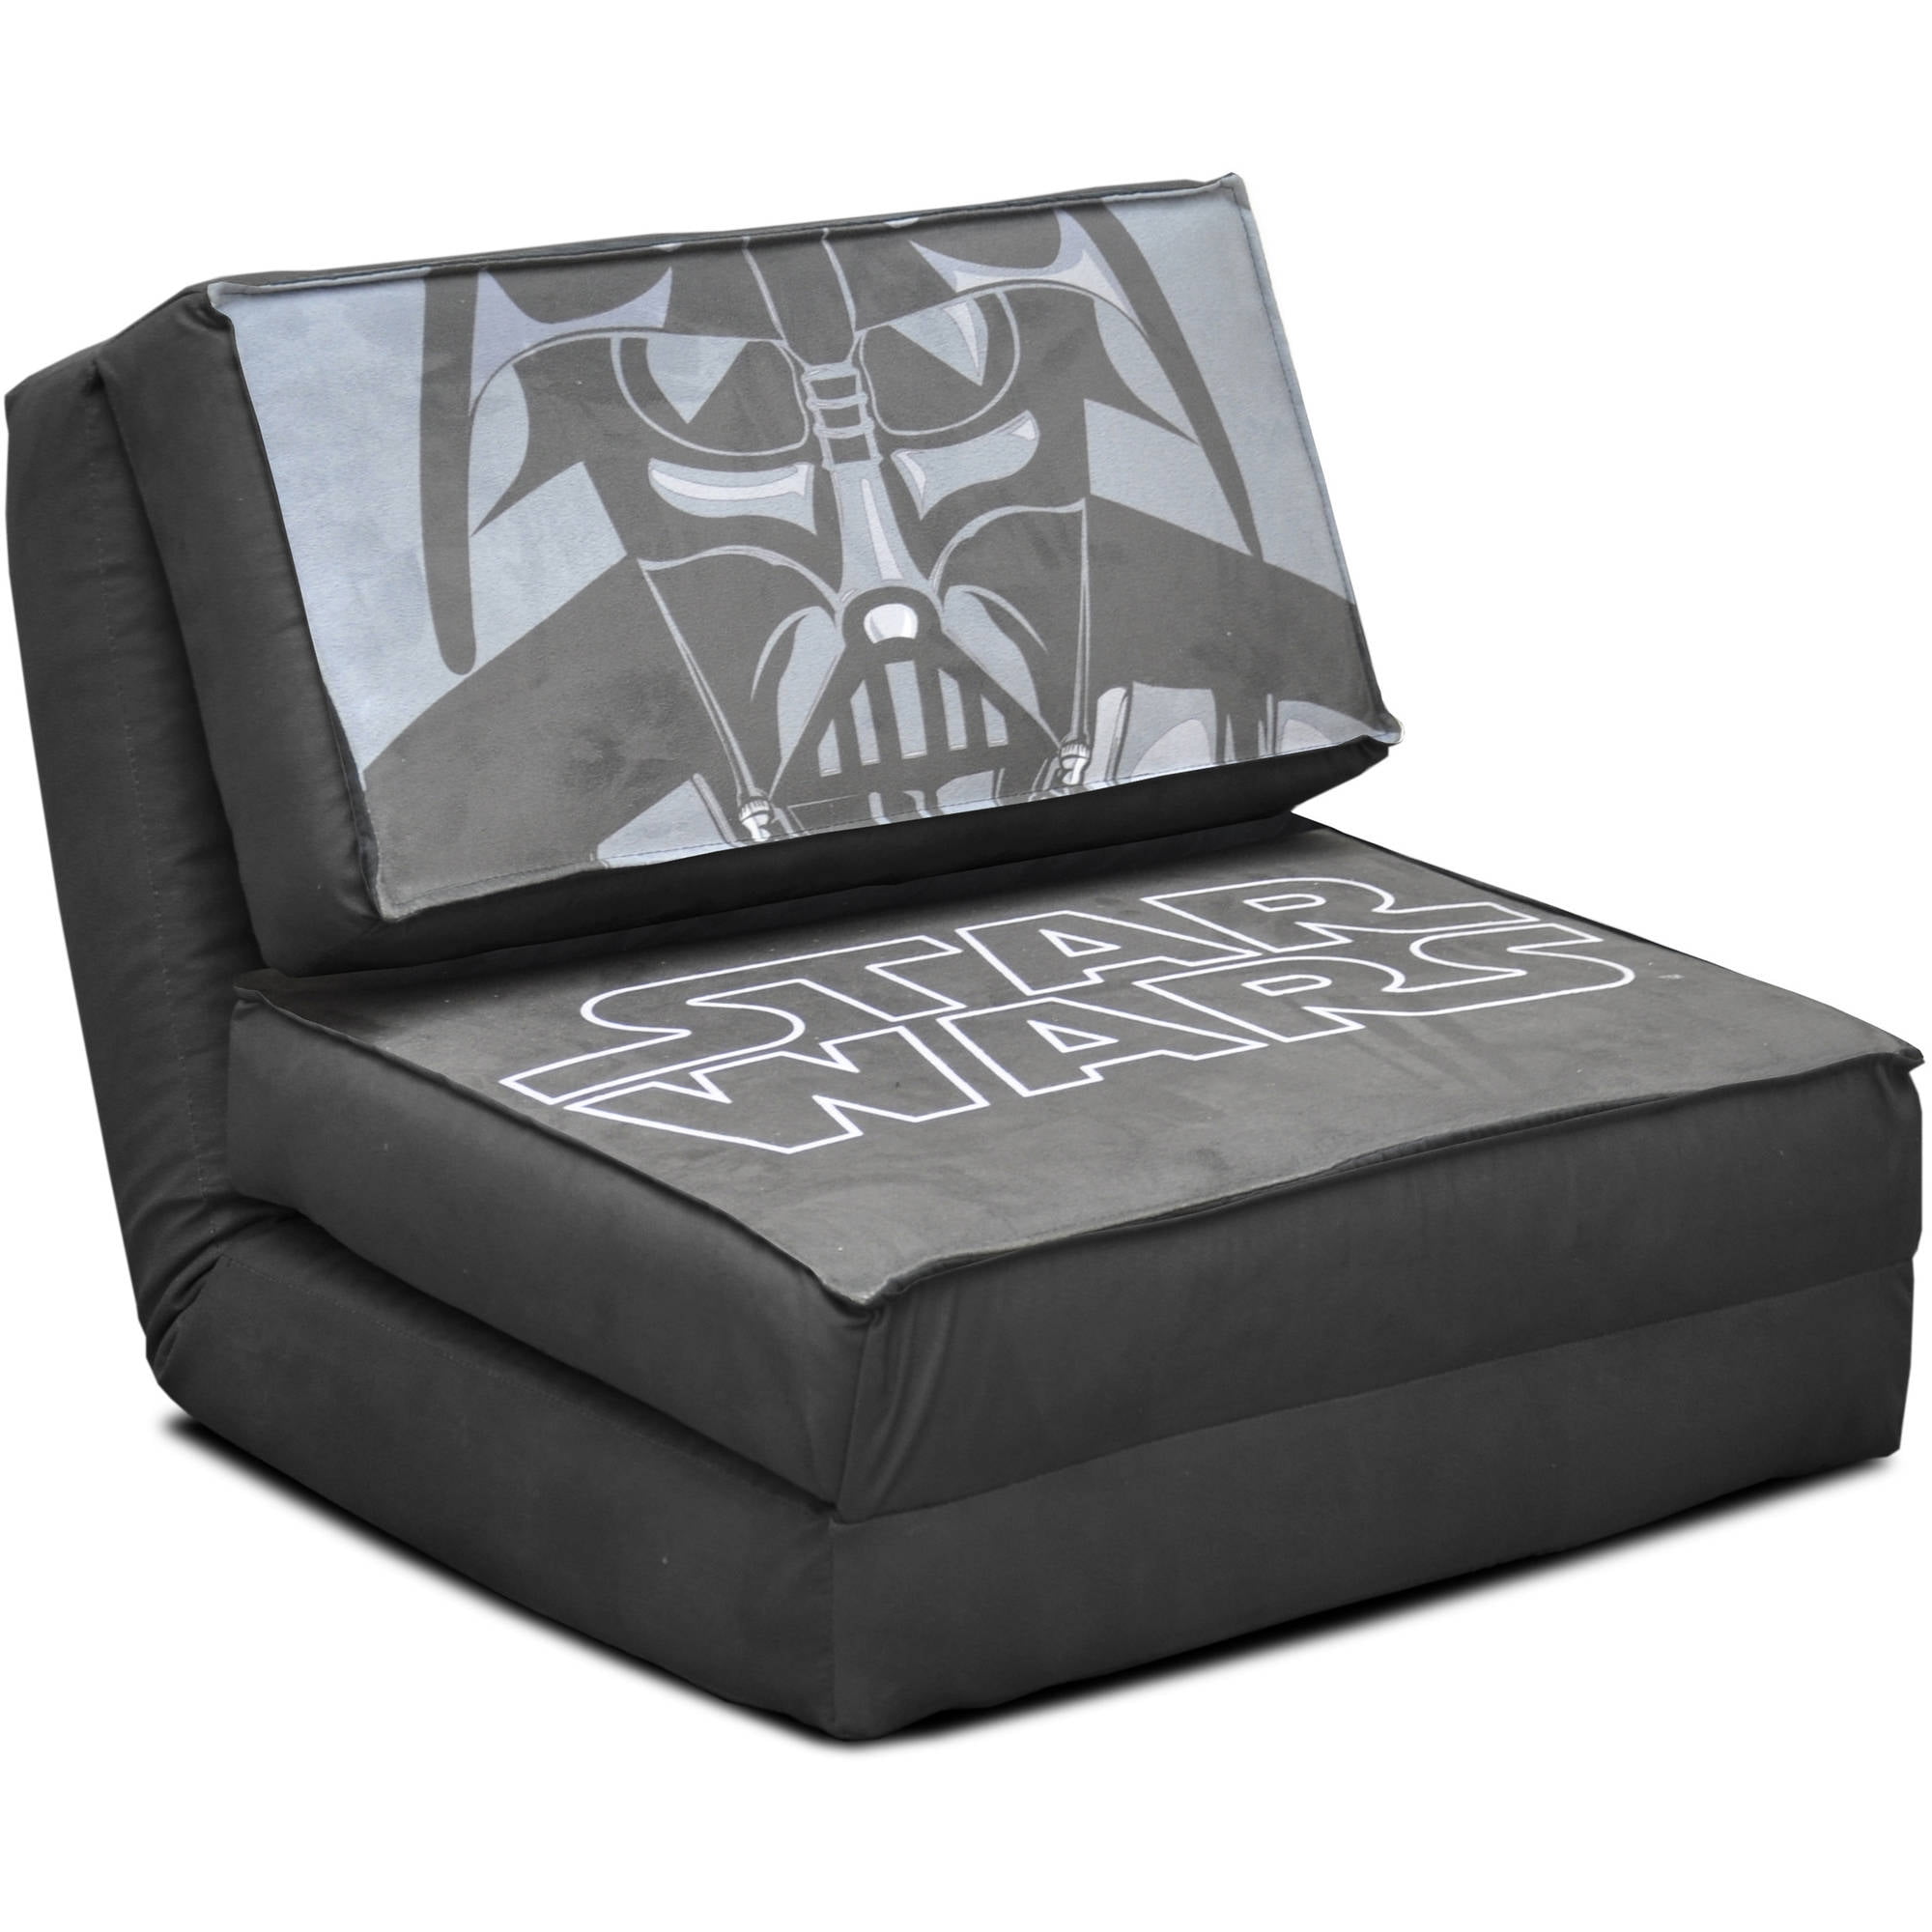 Your Zone Star Wars Darth Vader Kids Flip Chair Available In